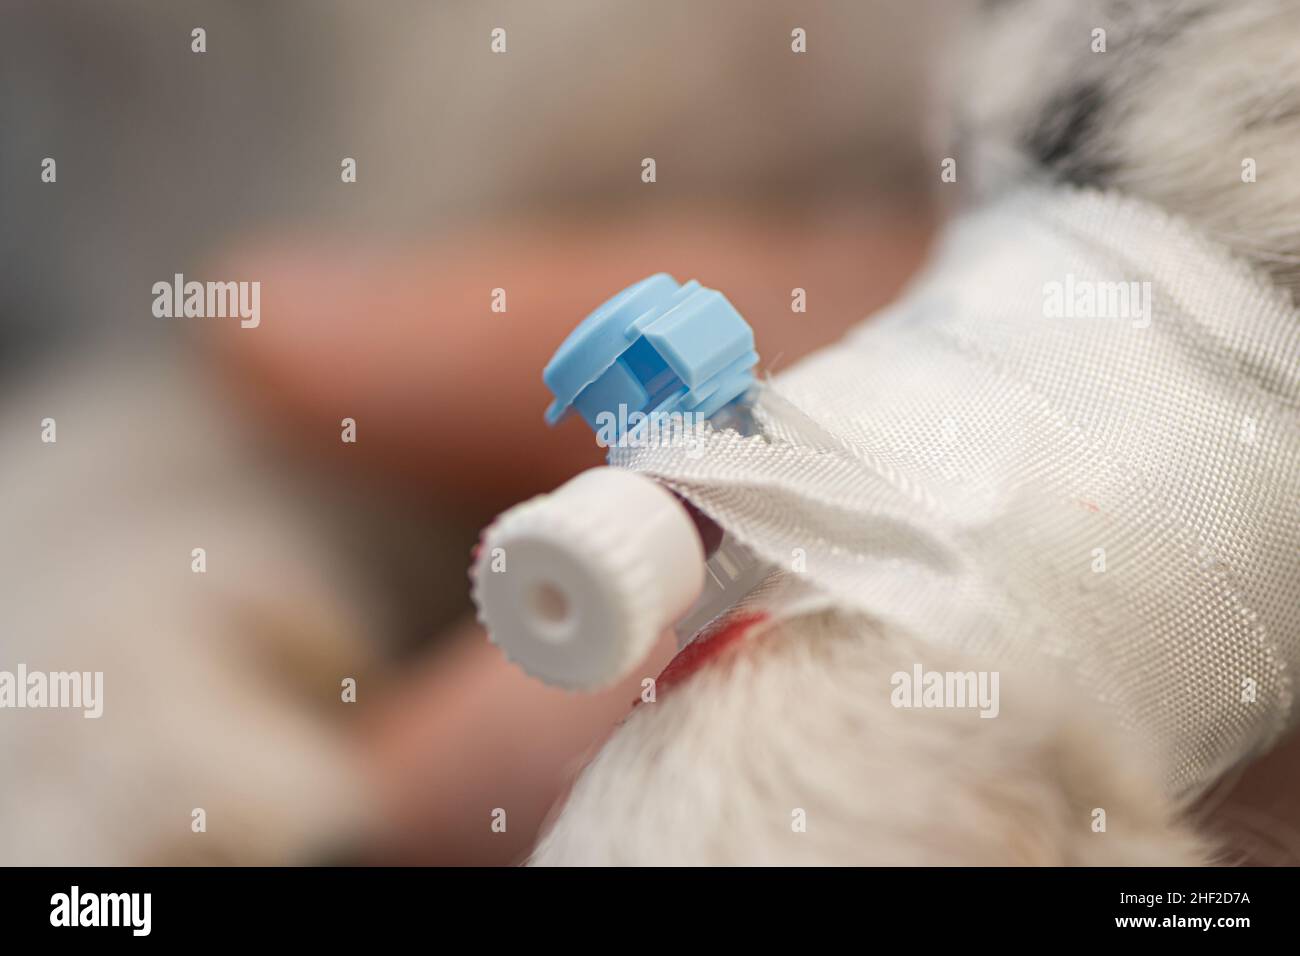 small sick jack russell terrier dog at the vet. Veterinarian prepares the dog for surgery and places a canula to give intravenous medication. Stock Photo